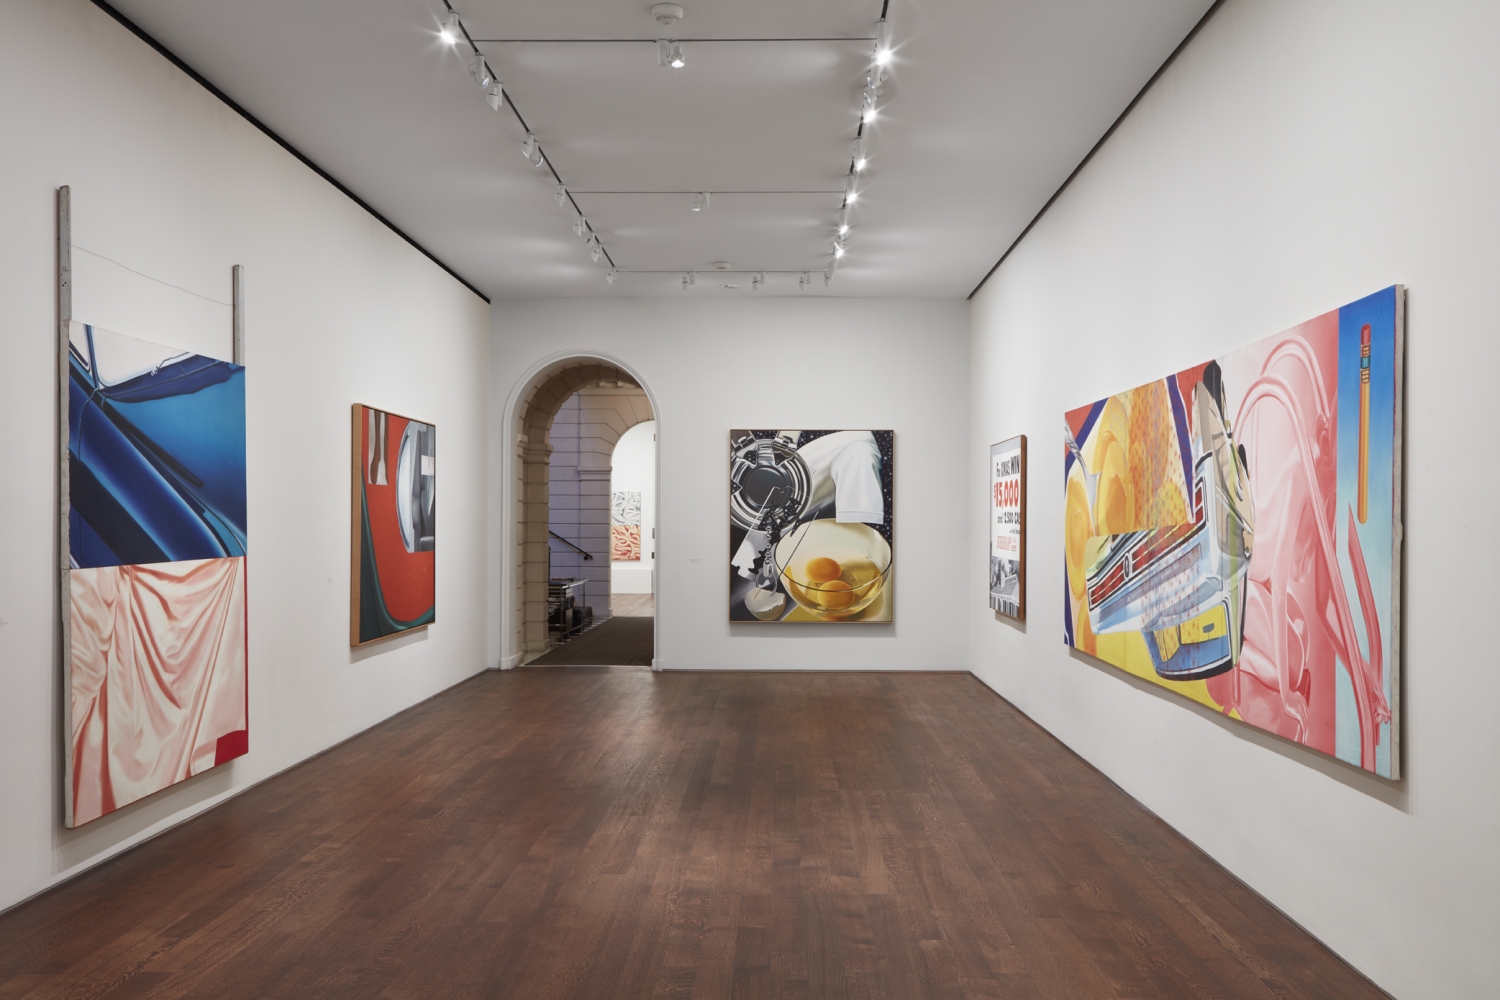 Installation view of&nbsp;James Rosenquist: His American Life,&nbsp;October 25&ndash;December 7, 2018.&nbsp;, James Rosenquist,&nbsp;1, 2, 3, Outside,&nbsp;1963, Lent by&nbsp;Spencer Museum of Art, University of Kansas, Gift from the Gene Swenson Collection